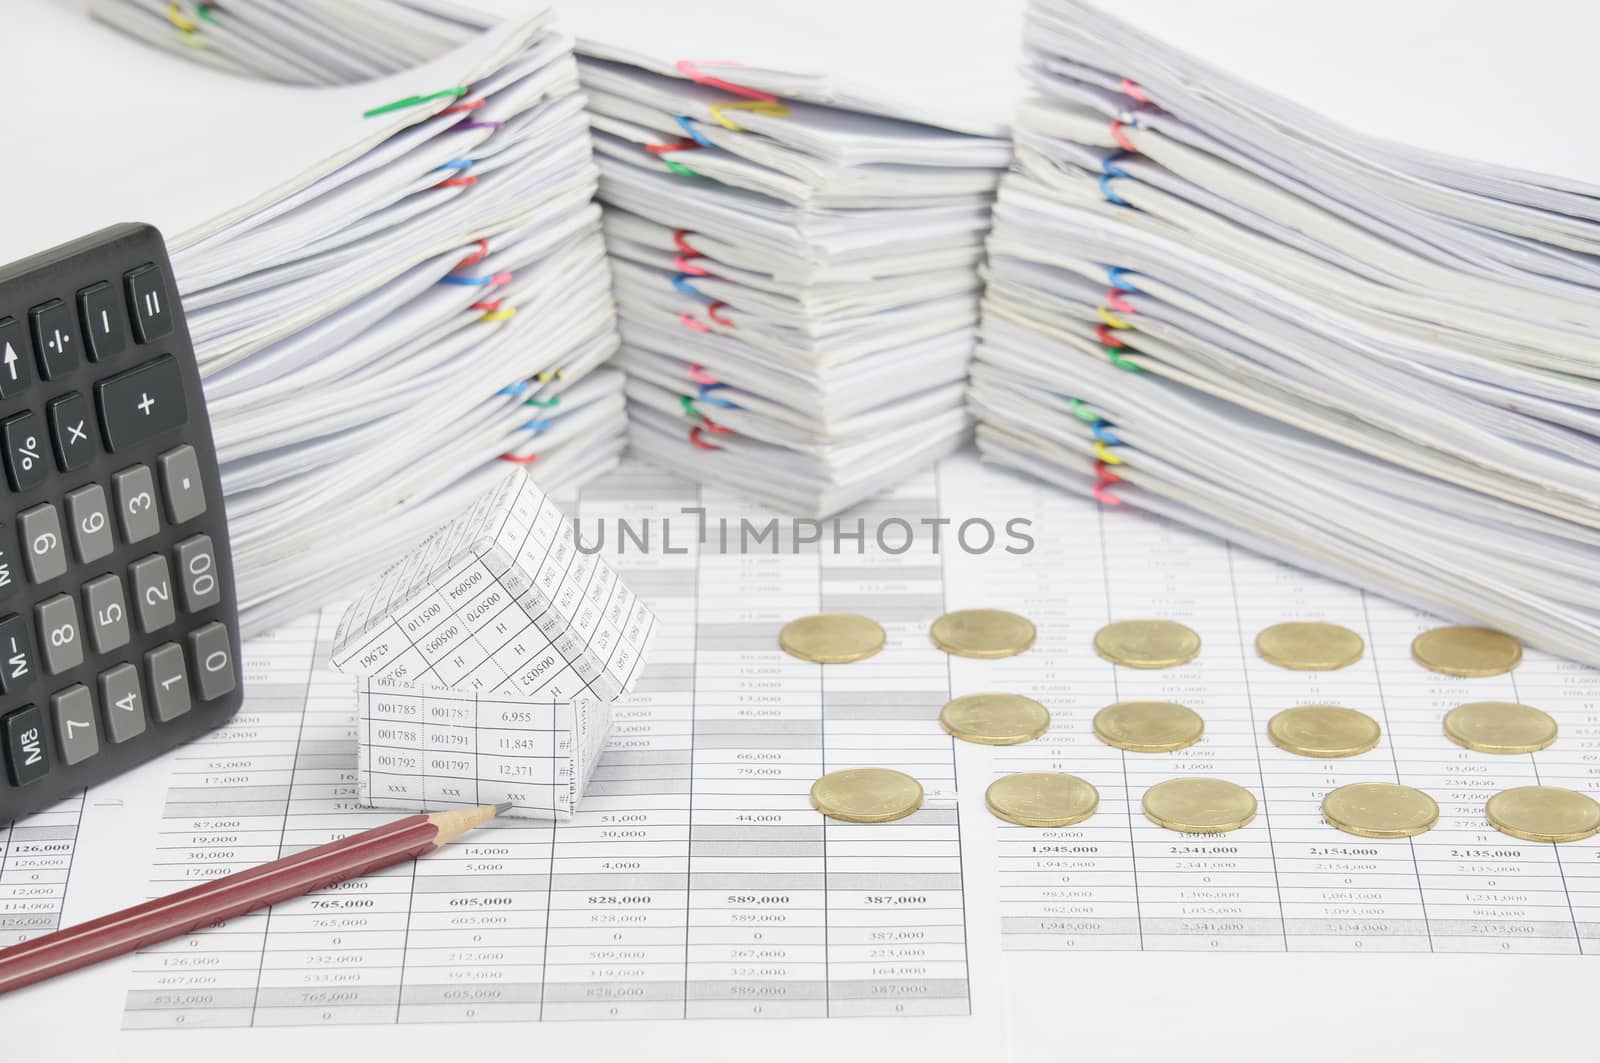 House and brown pencil on finance account have row of gold coins and calculator place vertical with overload of paperwork with colorful paperclip as background.